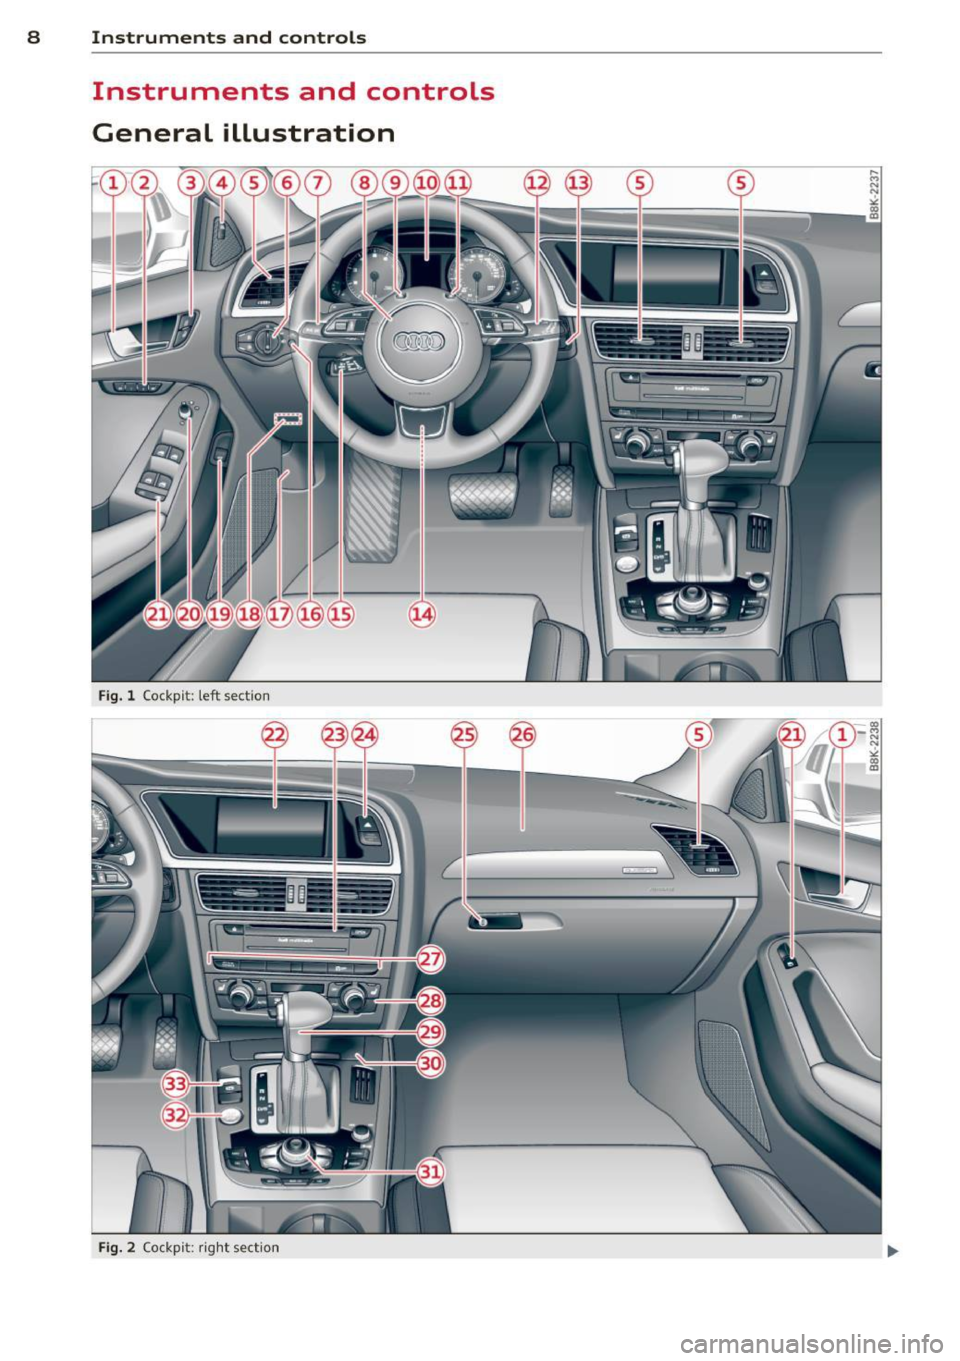 AUDI A4 2013  Owners Manual 8  Instruments and controls 
Instruments  and  controls 
General  illustration 
Fig. l Cockp it:  left  sect io n 
---=- ---1 =----- -
- --
- --
Fig. 2 Cock pi t: ri ght  sect io n  